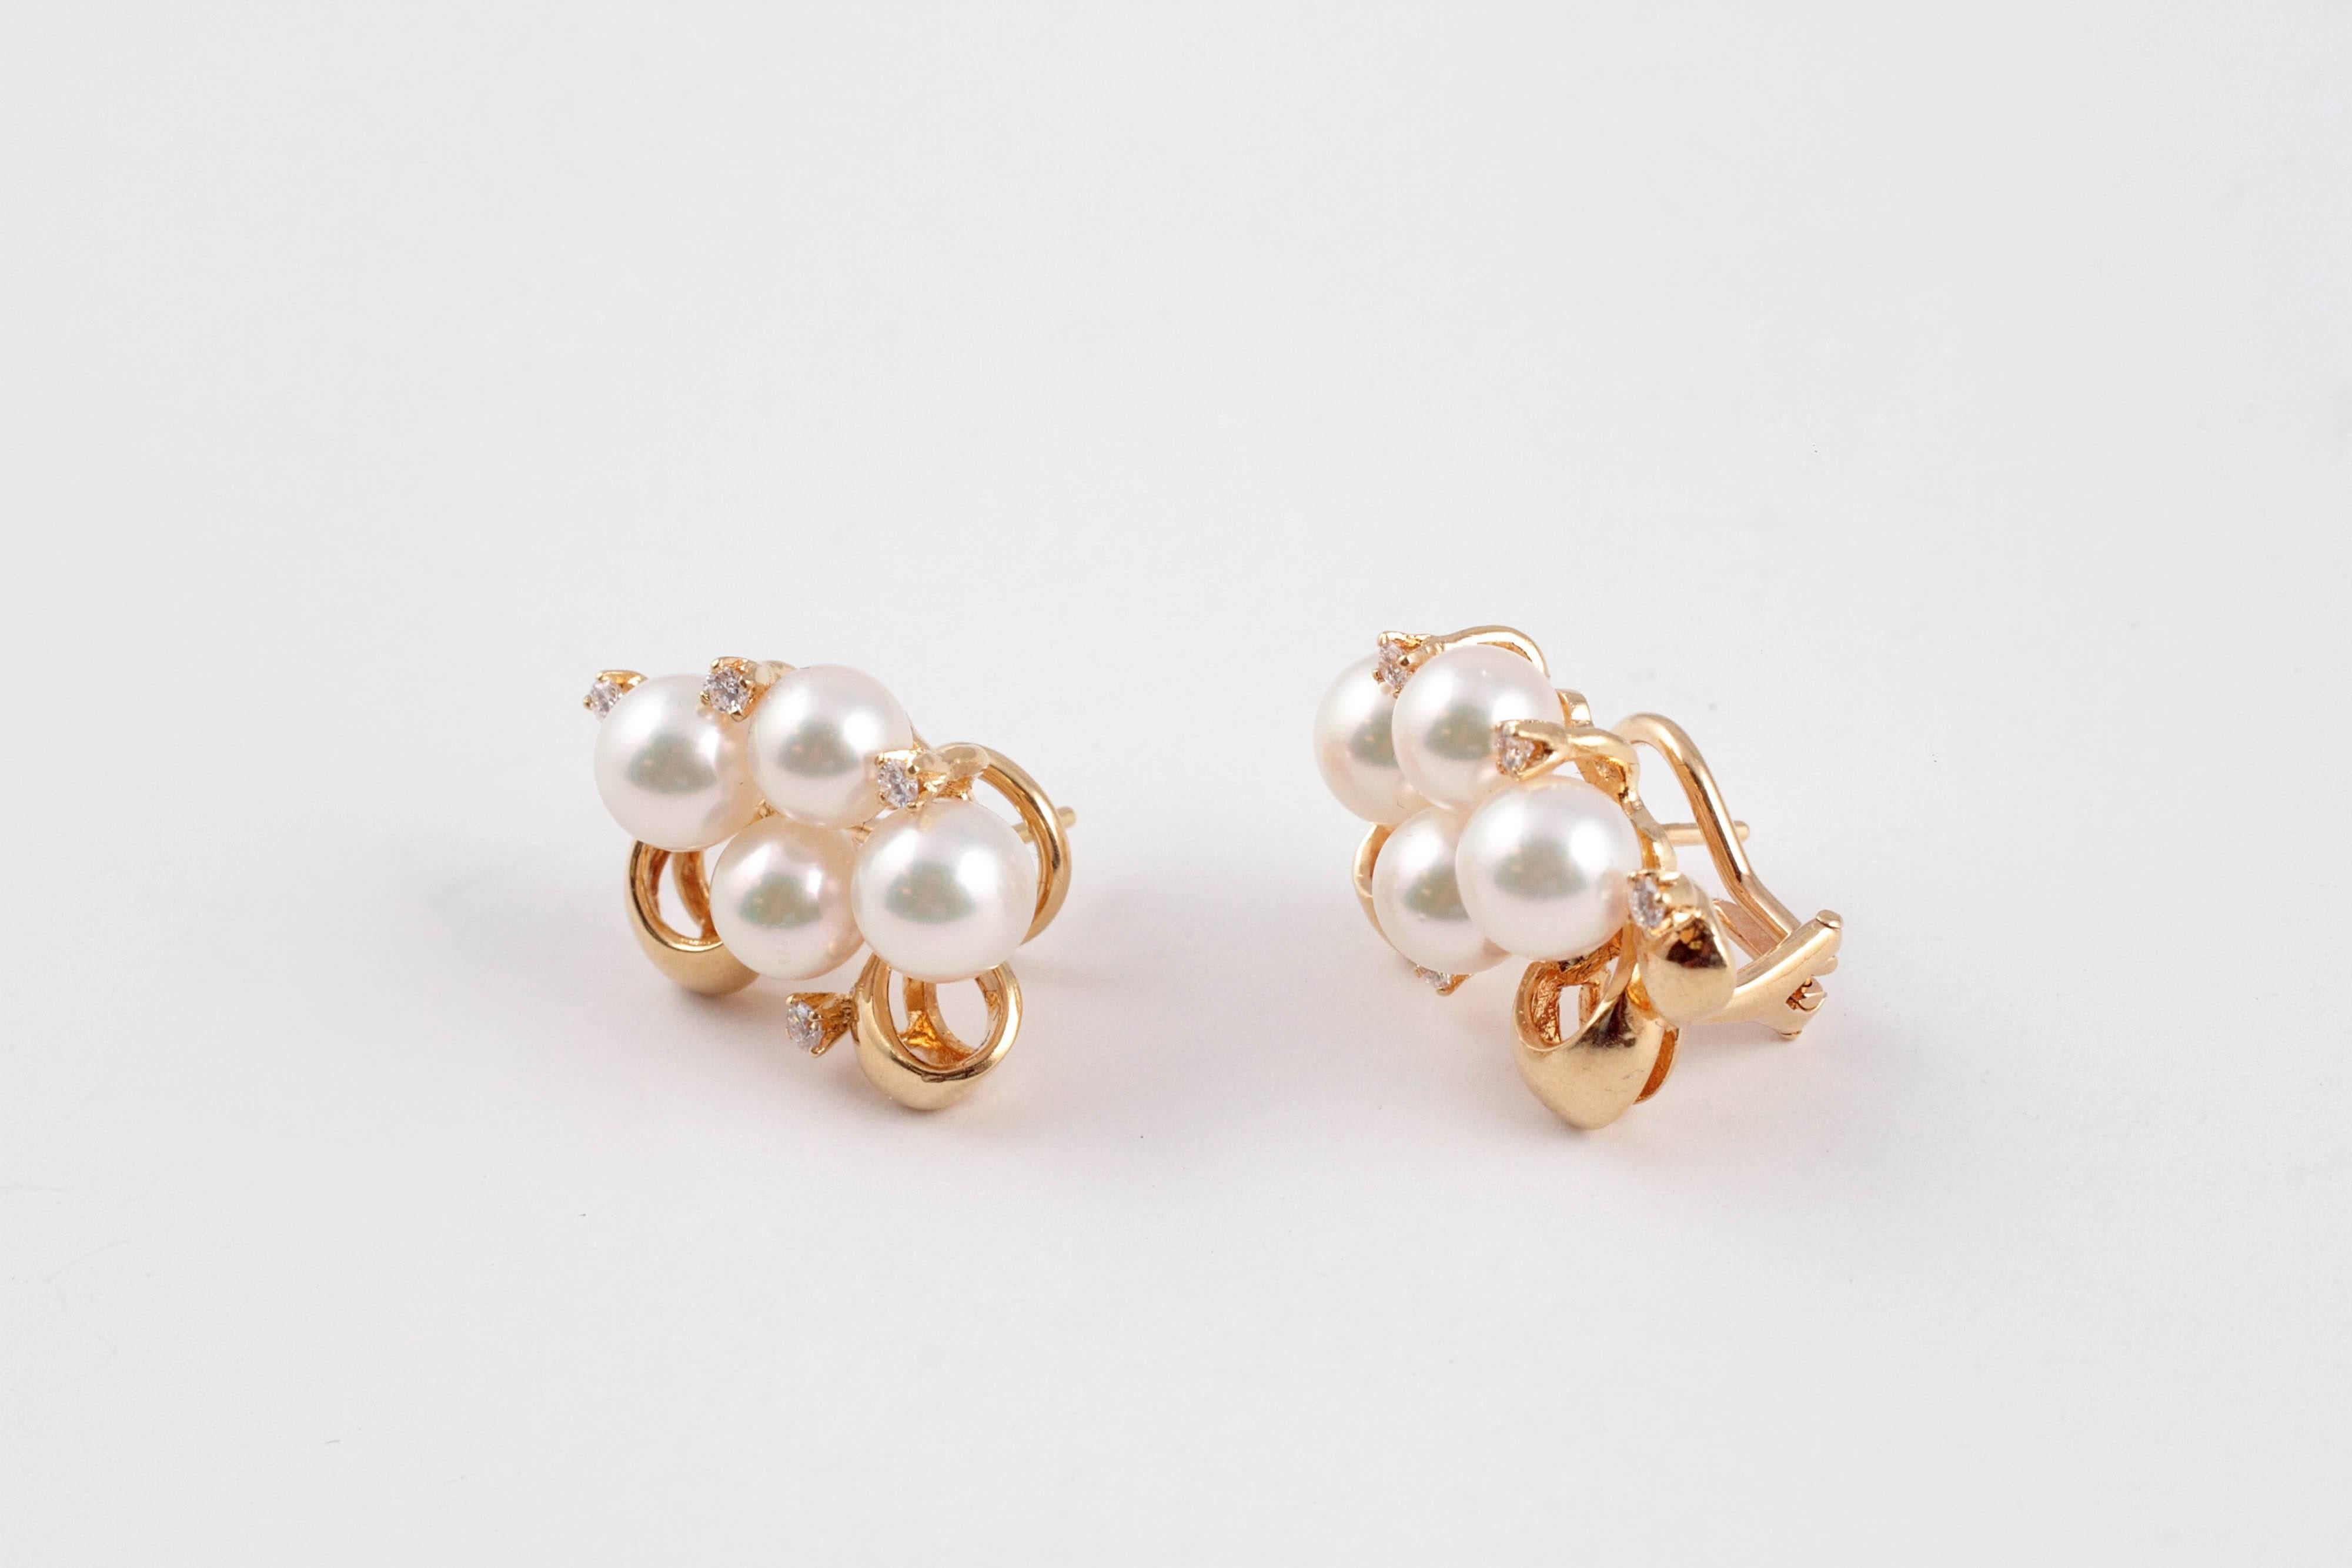 Classically designed Mikimoto cultured pearls and diamond earrings with omega backs.  Set in 18 karat gold.